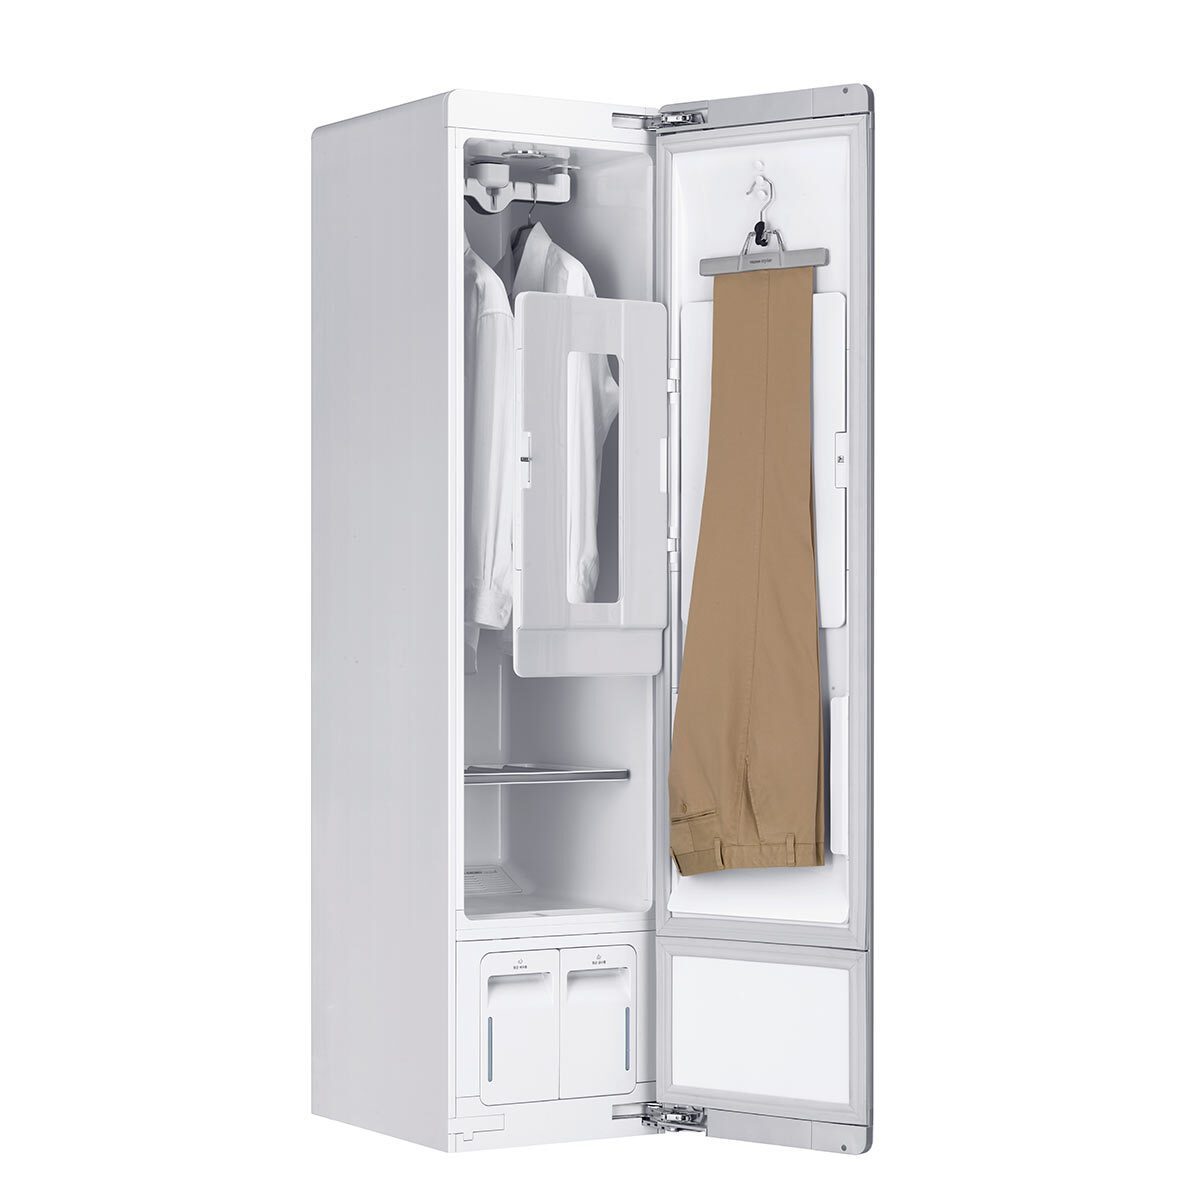 LG S3WF WiFi Connected Styler Steam Clothing Care System® in White - Signature Retail Stores